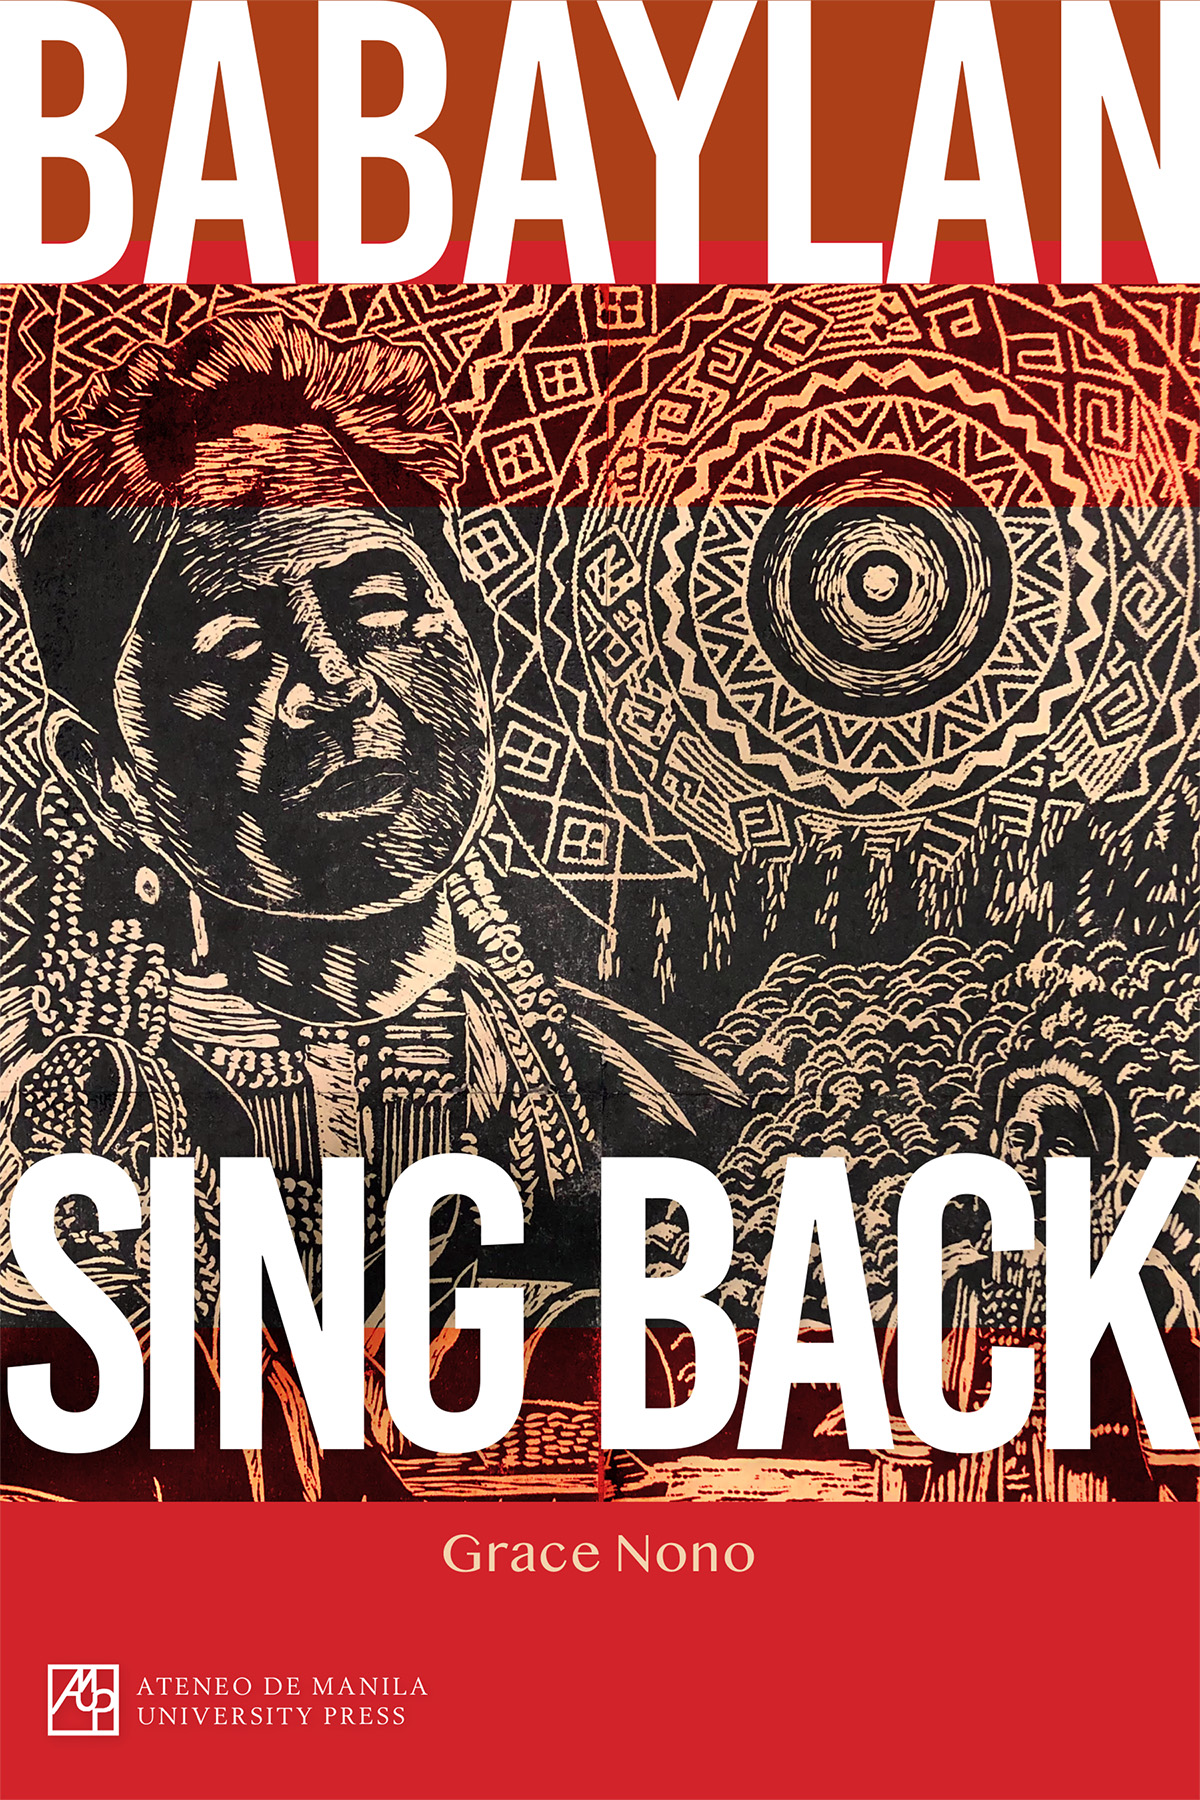 Book cover of Babaylan Sing Back by Grace Nono